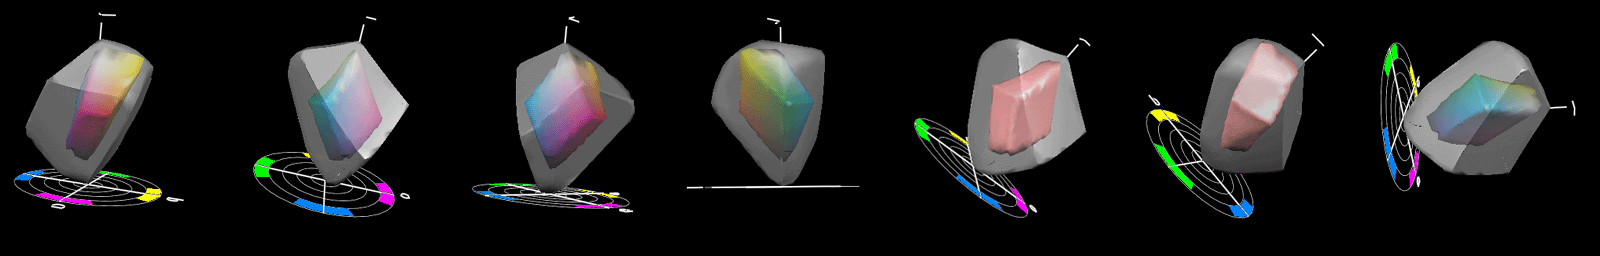 3D comparison of Fogra 39 and ECI-RGB color gamuts in CIE Lab 2* colorspace